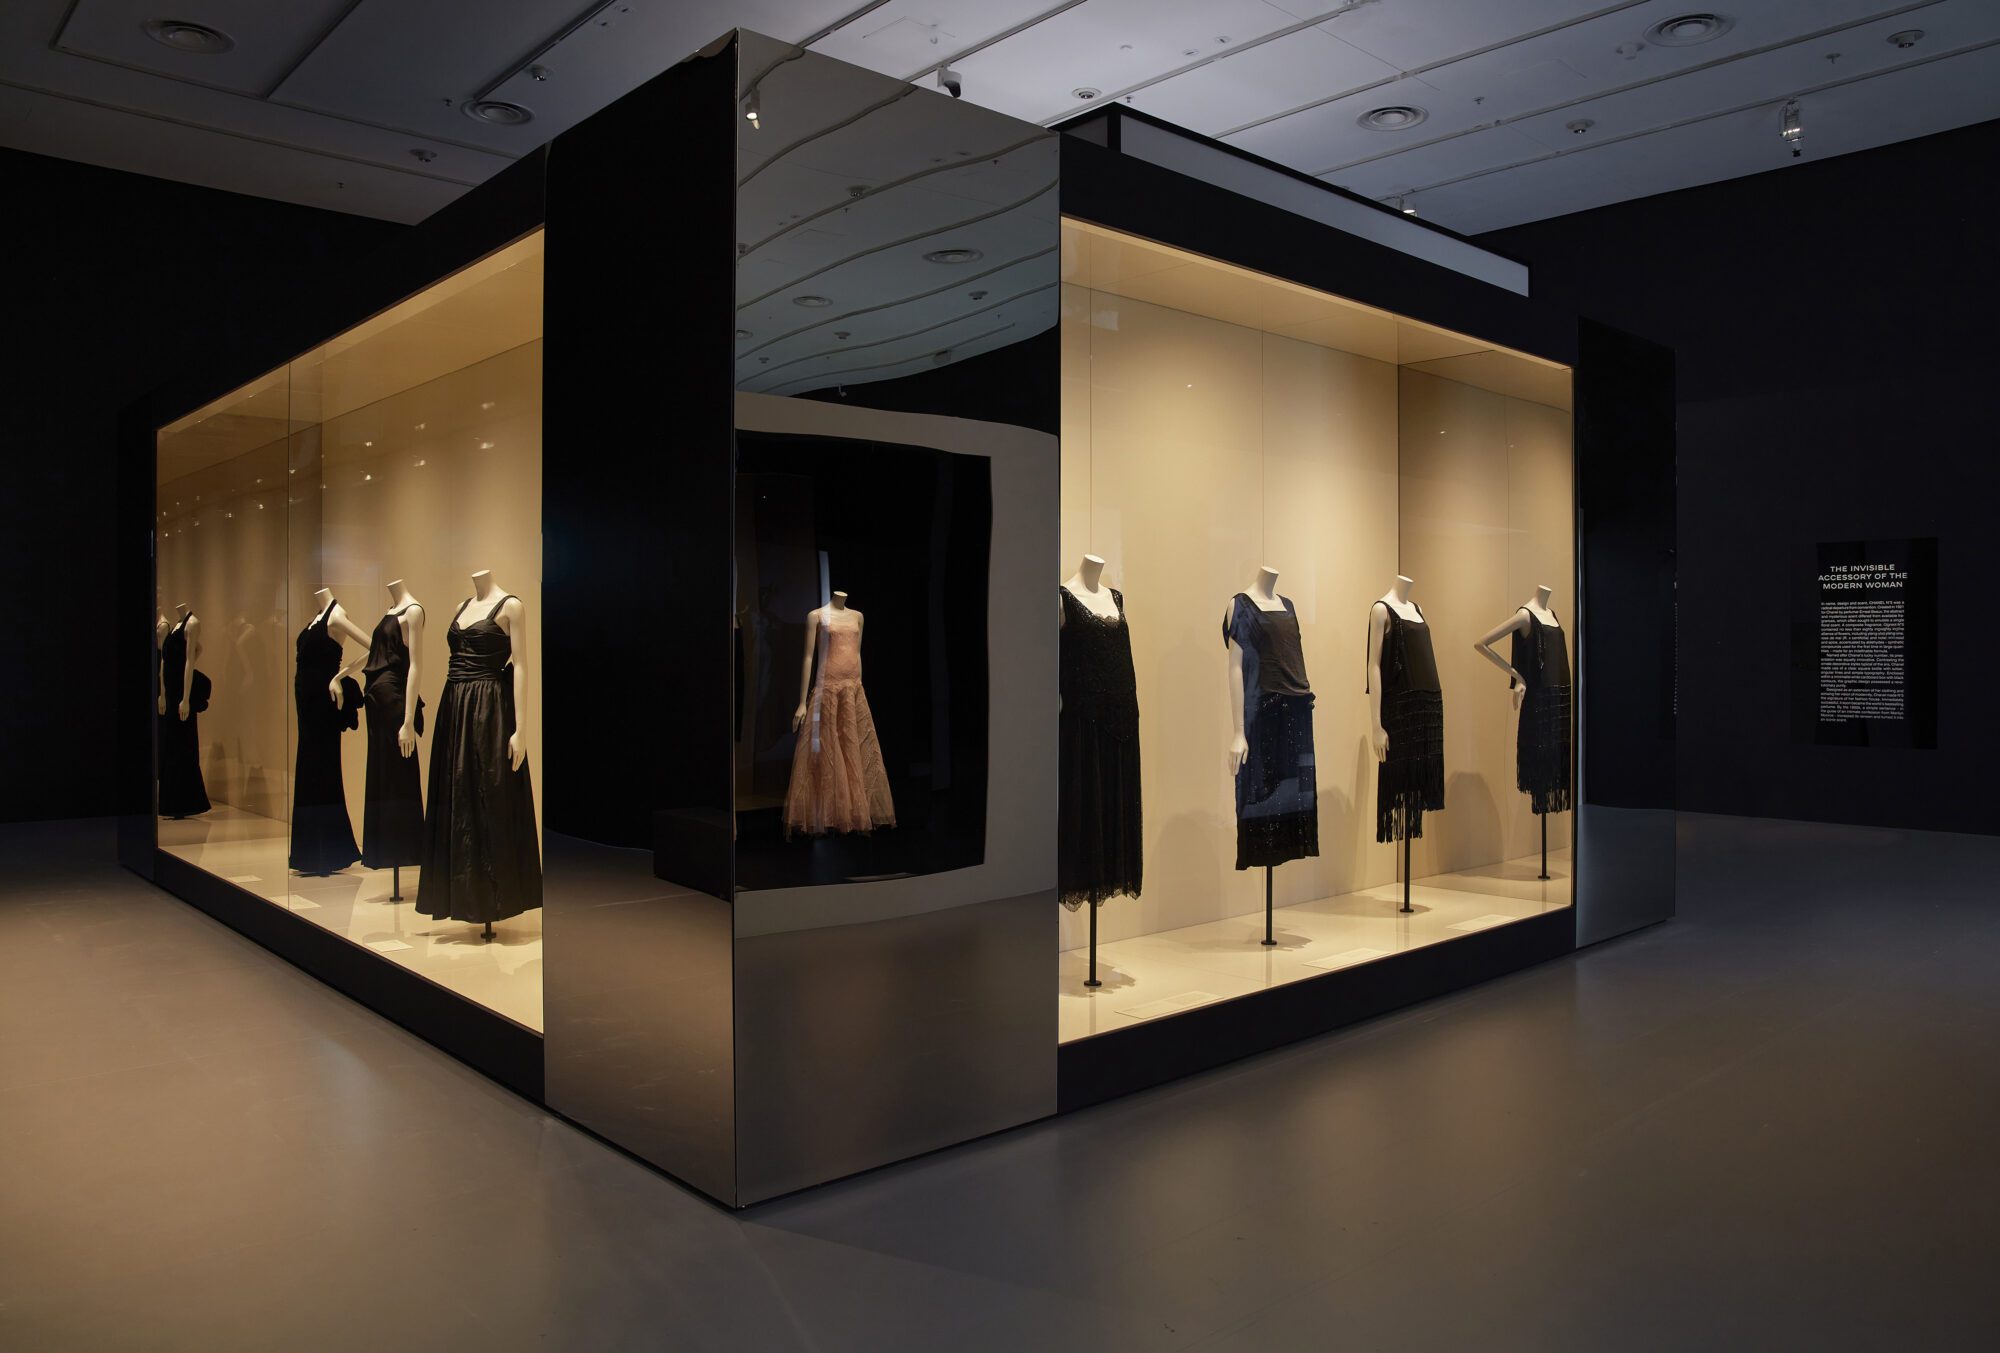 Installation view of
Gabrielle Chanel. Fashion Manifesto as it was seen during its run at NGV International, Melbourne in 2022. File Photo: Sean Fennessy